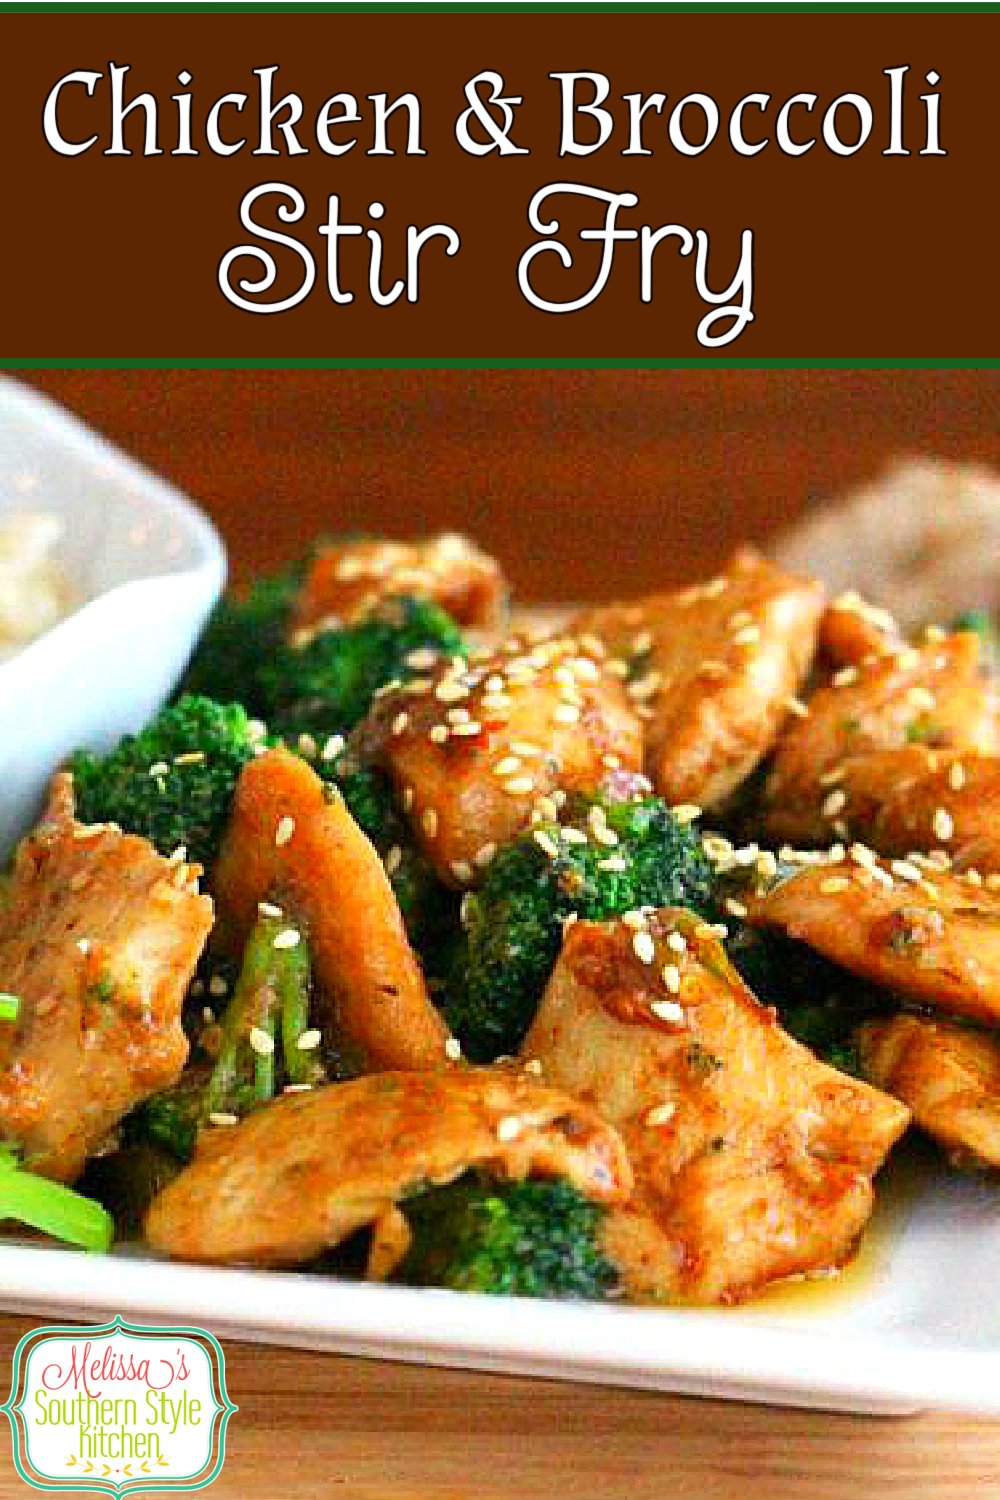 Skip the drive though and make this better than take-out Chicken and Broccoli Stir Fry #stirfry #chickenstirfry #chickenandbroccolistirfry #easychickenrecipes #asianchicken #asianinspired #chickenbreastrecipes #dinner #dinnerideas #southernfood #southernrecipes via @melissasssk